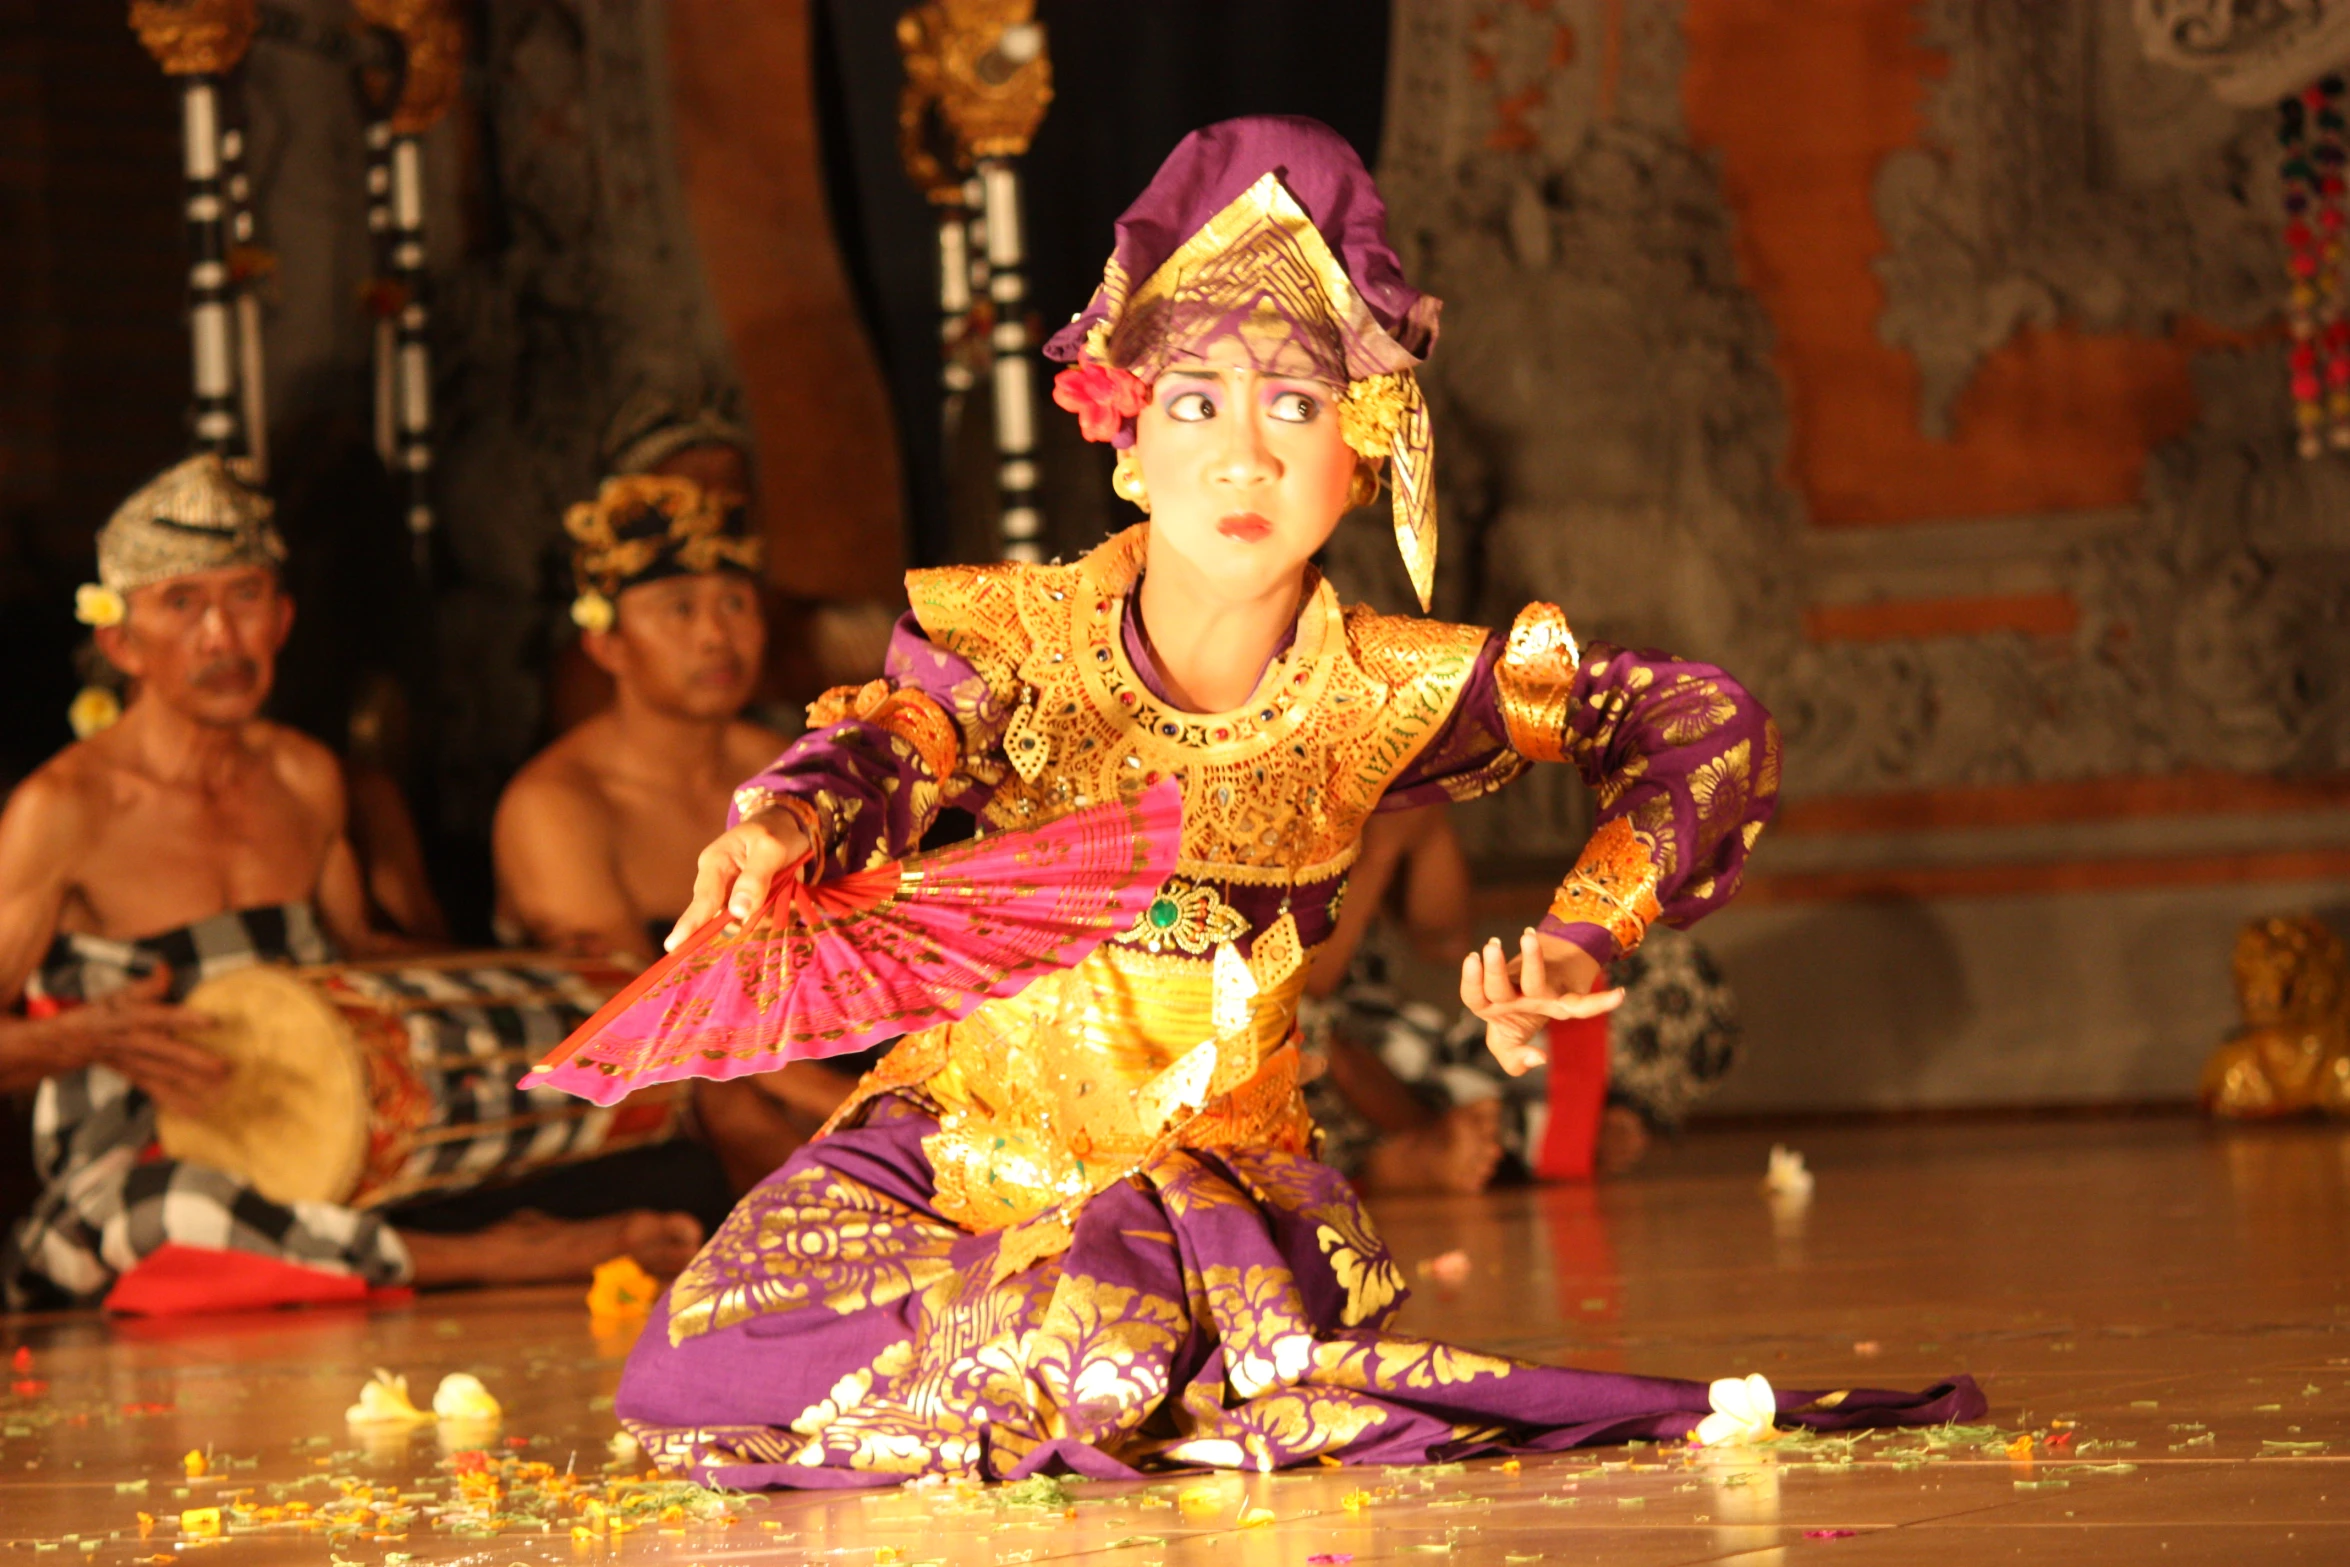 an image of a  performing a cultural dance